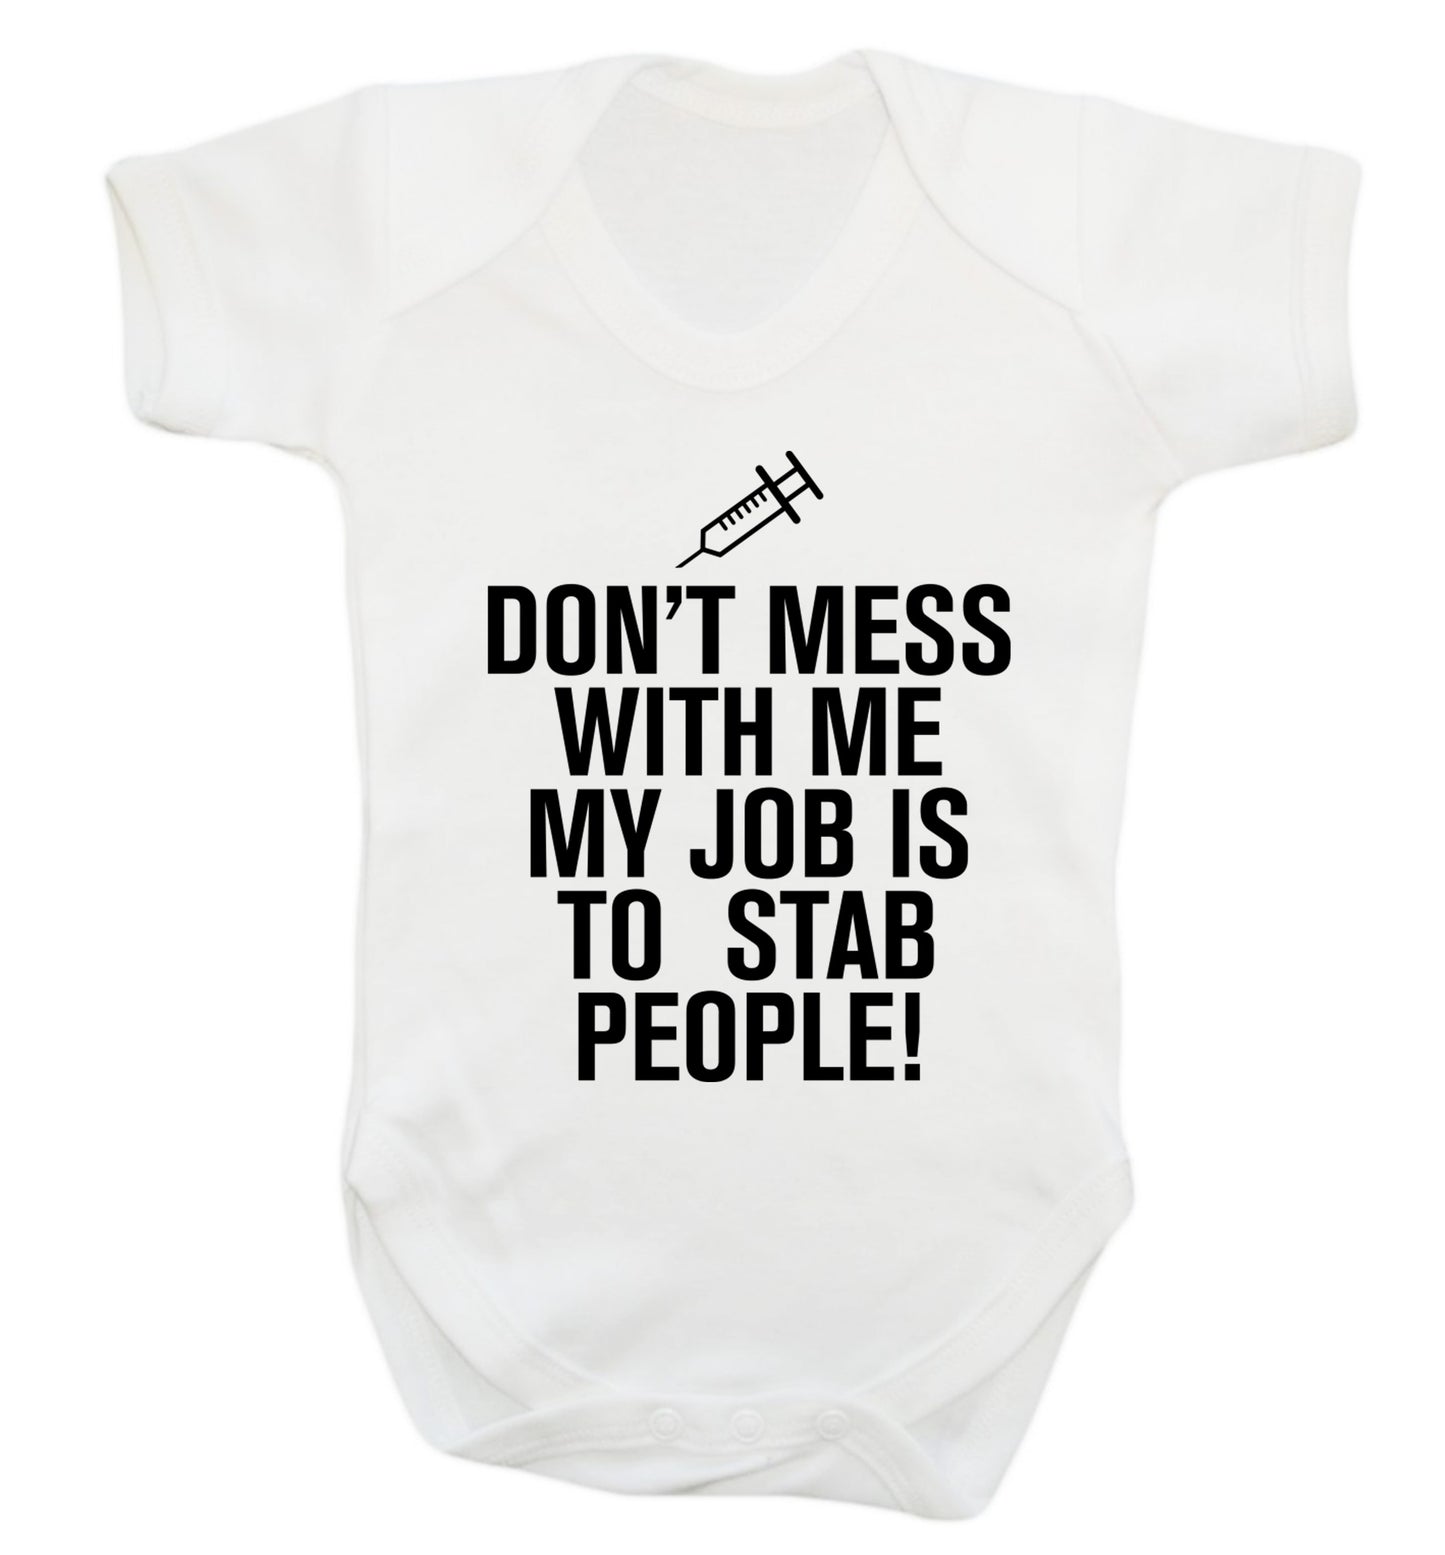 Don't mess with me my job is to stab people! Baby Vest white 18-24 months